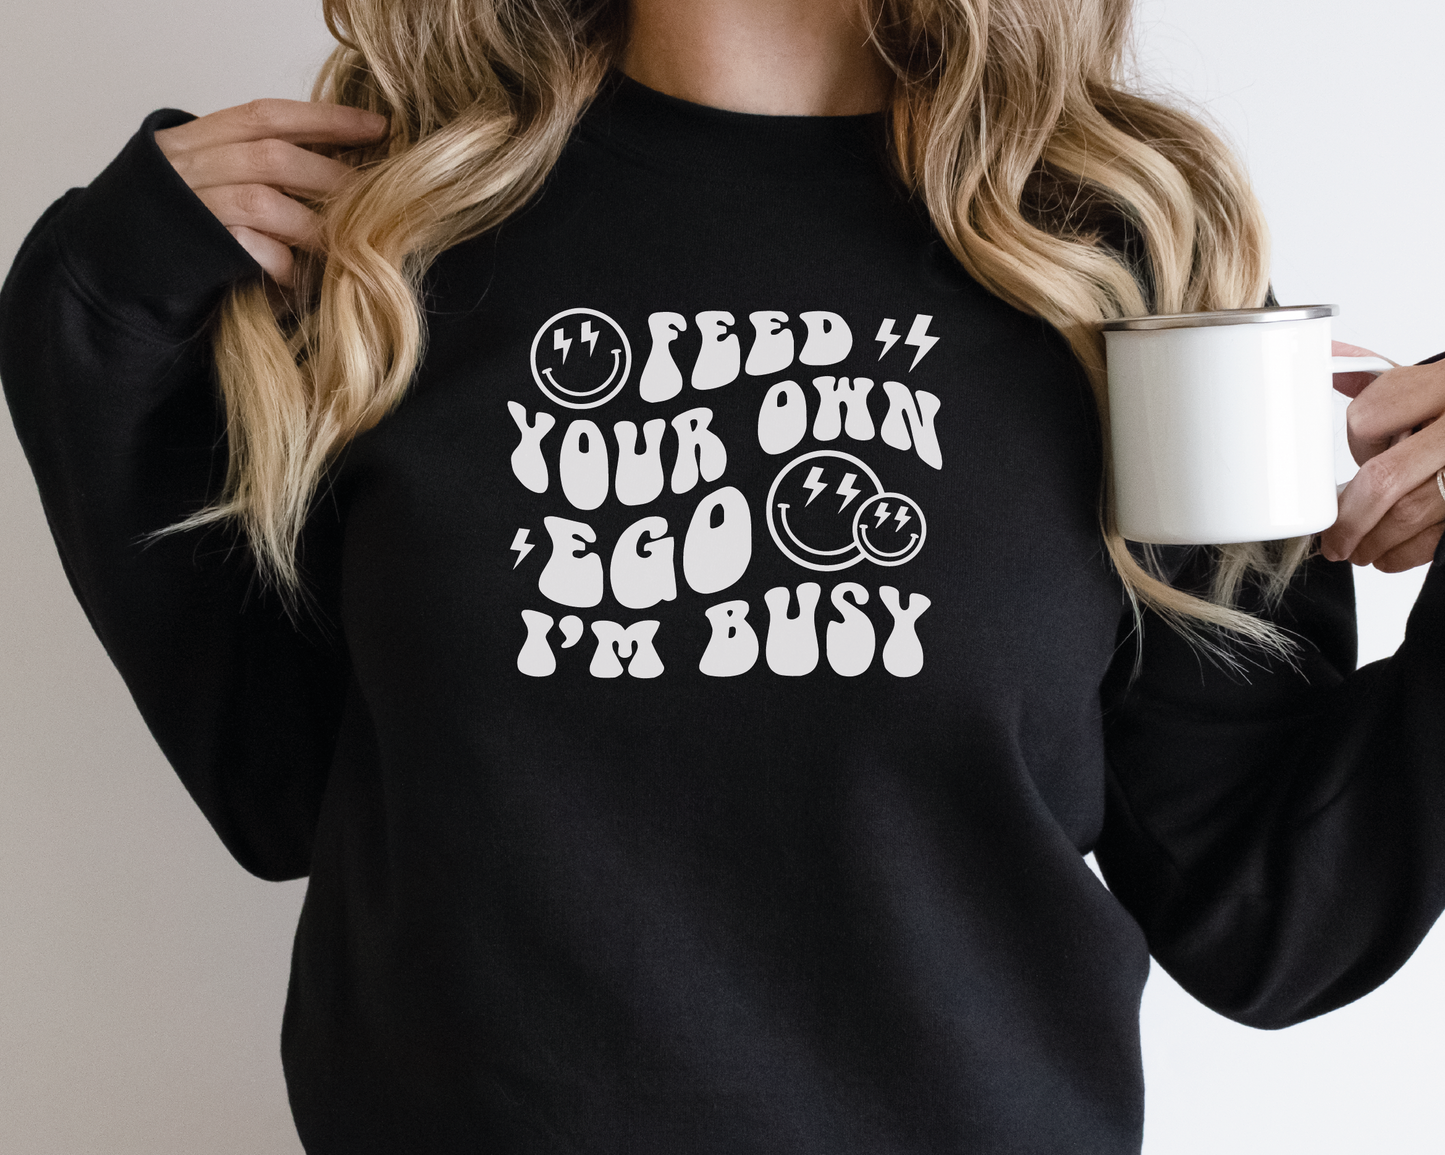 Feed Your Own Ego I'm Busy SVG PNG | Smile Face Sublimation | Sarcastic | Retro Vintage T shirt Design